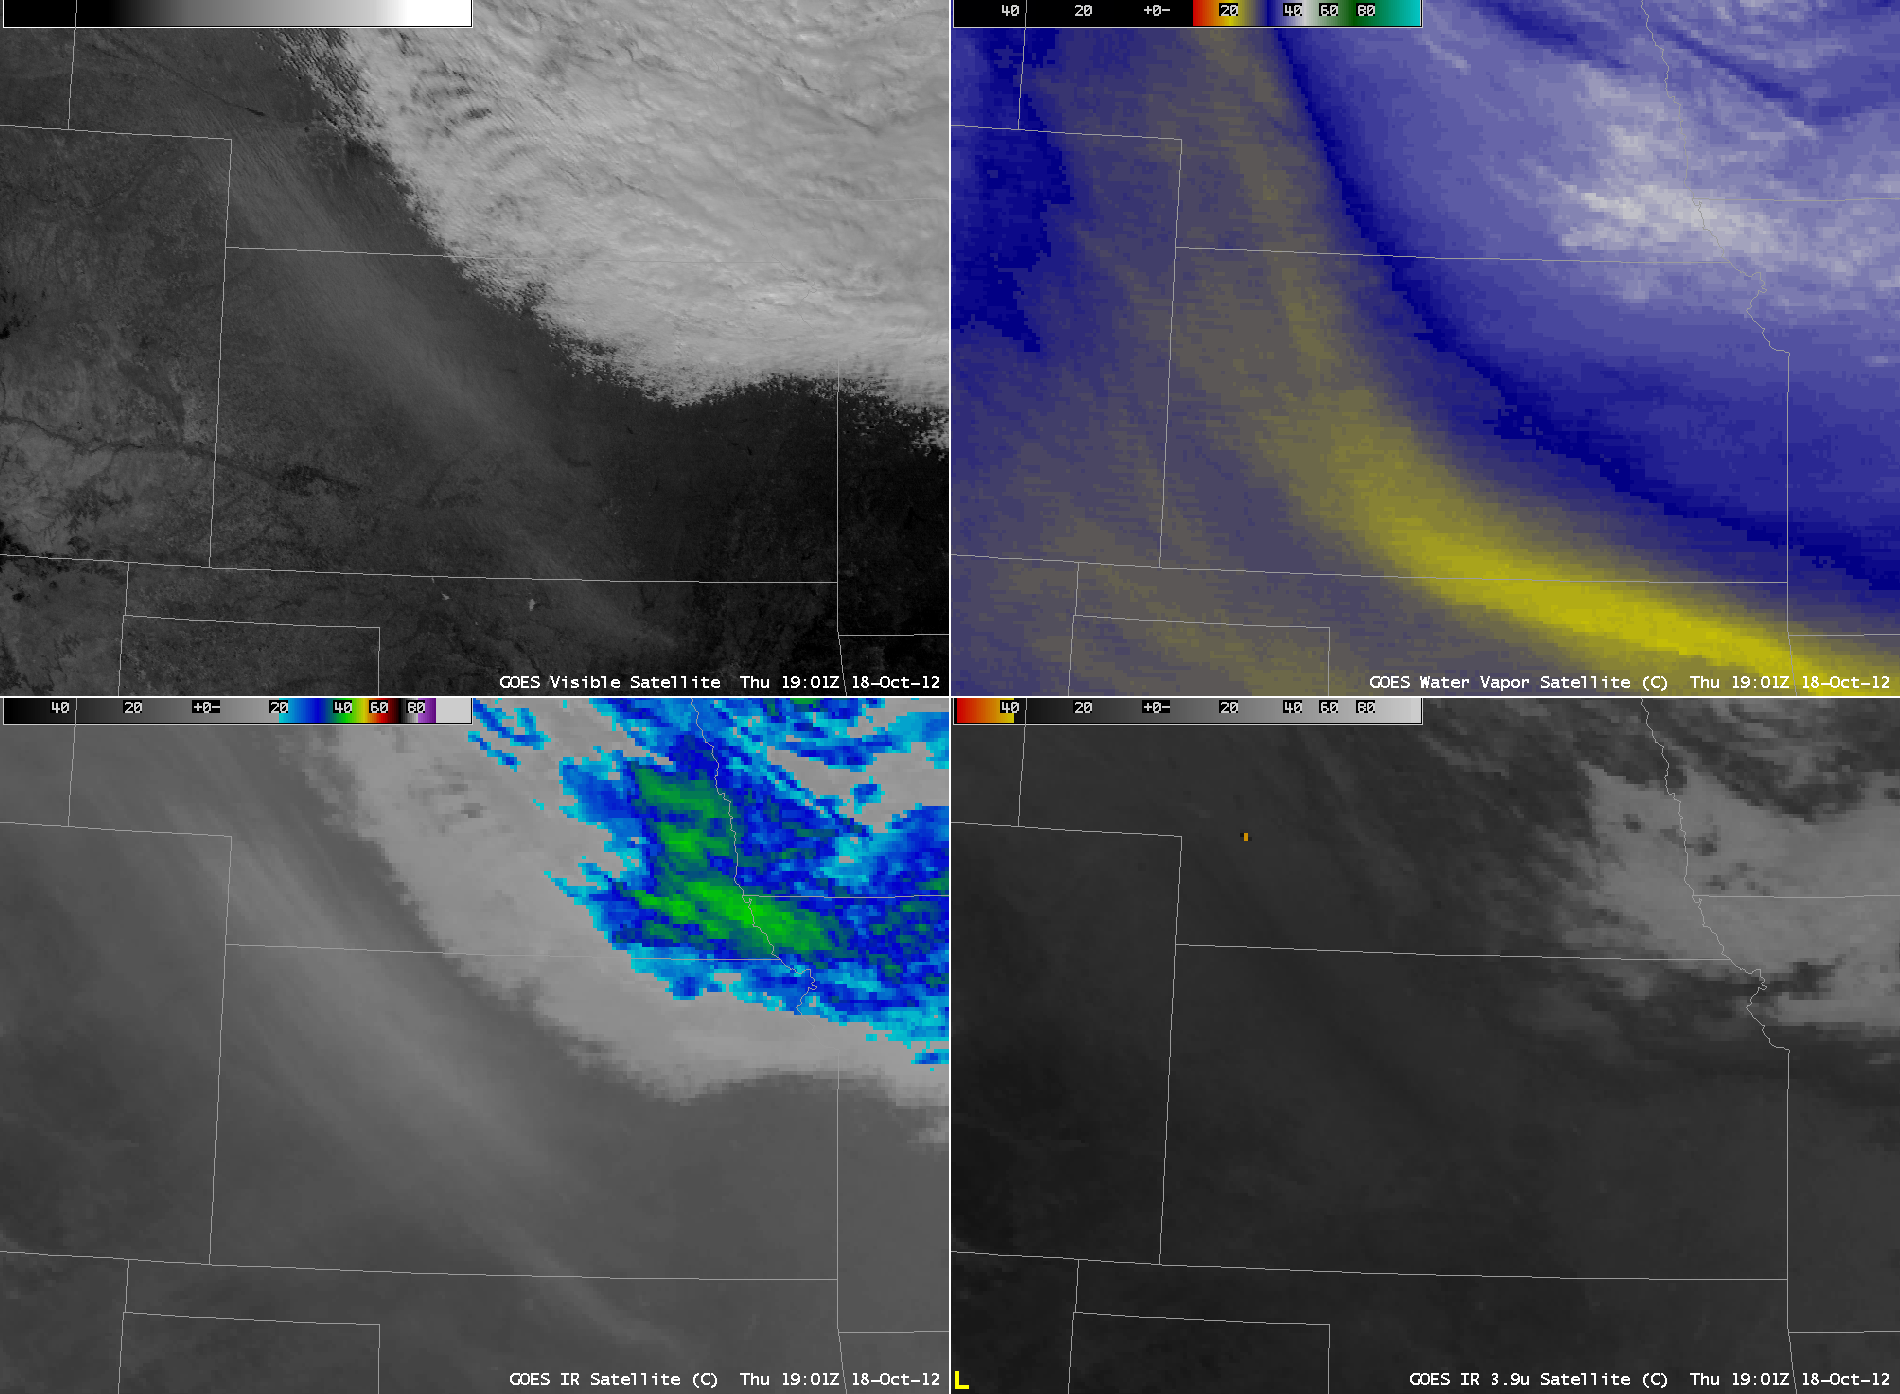 GOES-13 0.63 Âµm visible, 6.5 Âµm water vapor, 10.7 Âµm IR, and 3.9 Âµm shortwave IR images (click image to play animation)